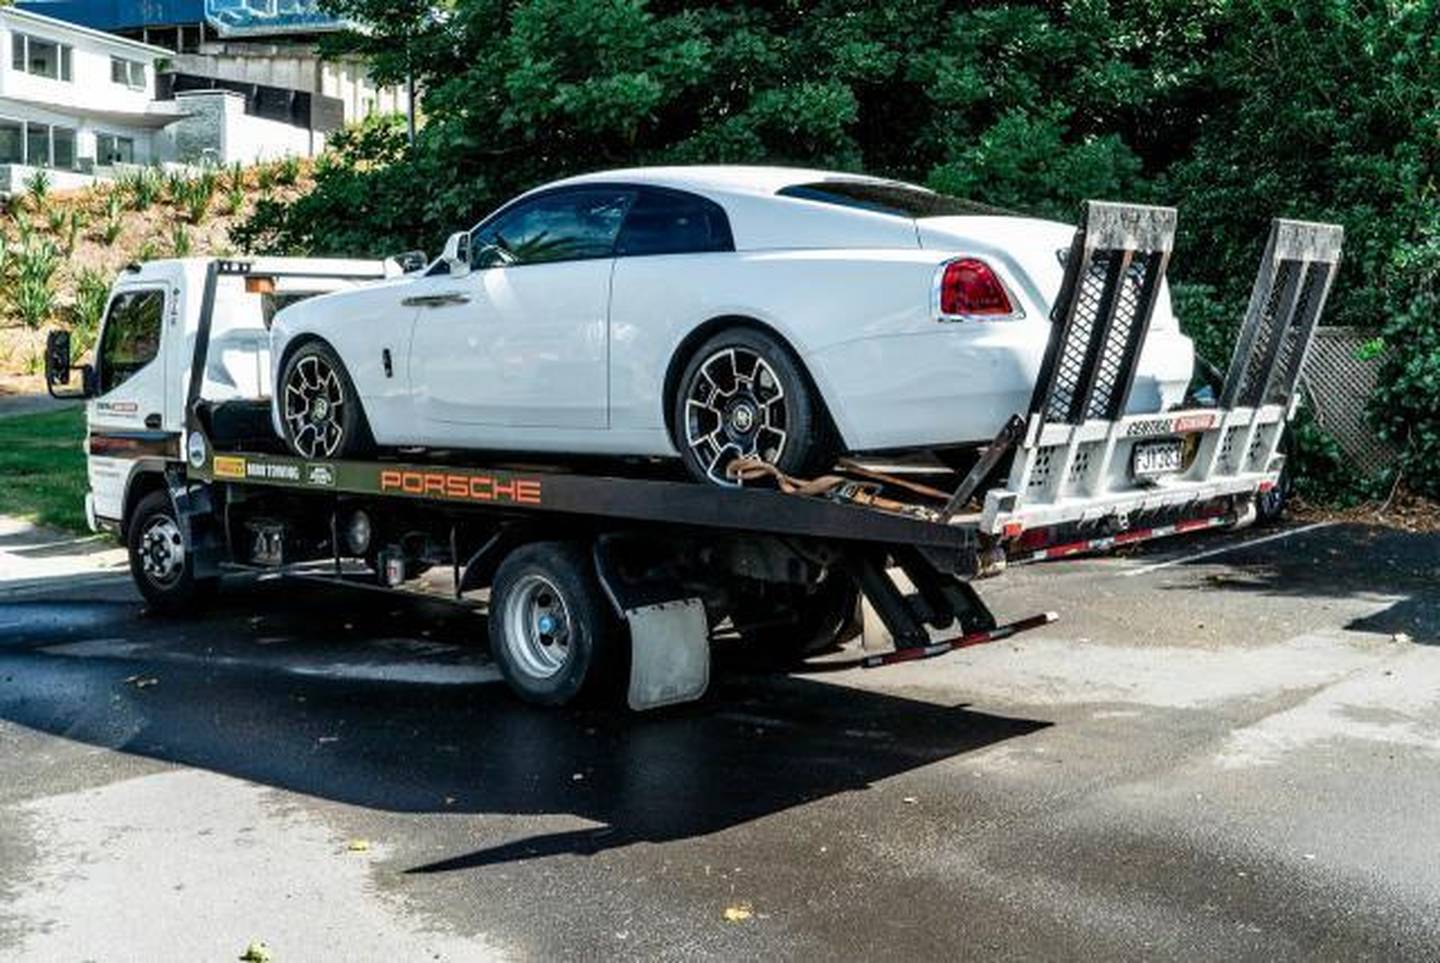 The Rolls Royce Wraith seized by police in Operation Nova. Photo: Supplied.